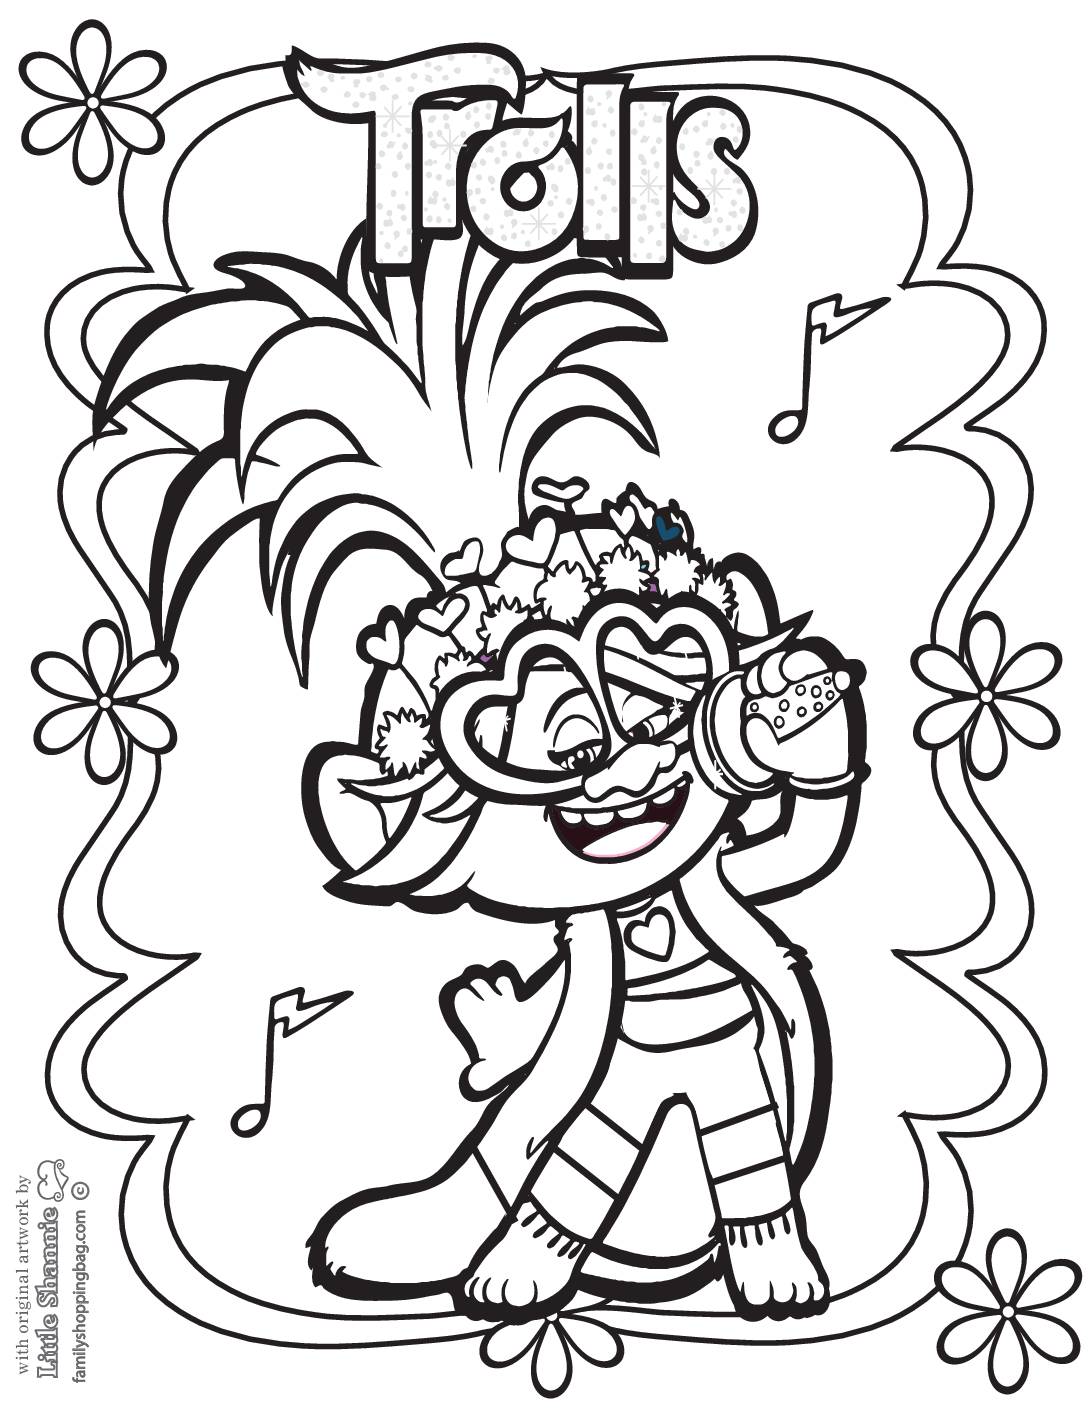 Coloring page trolls